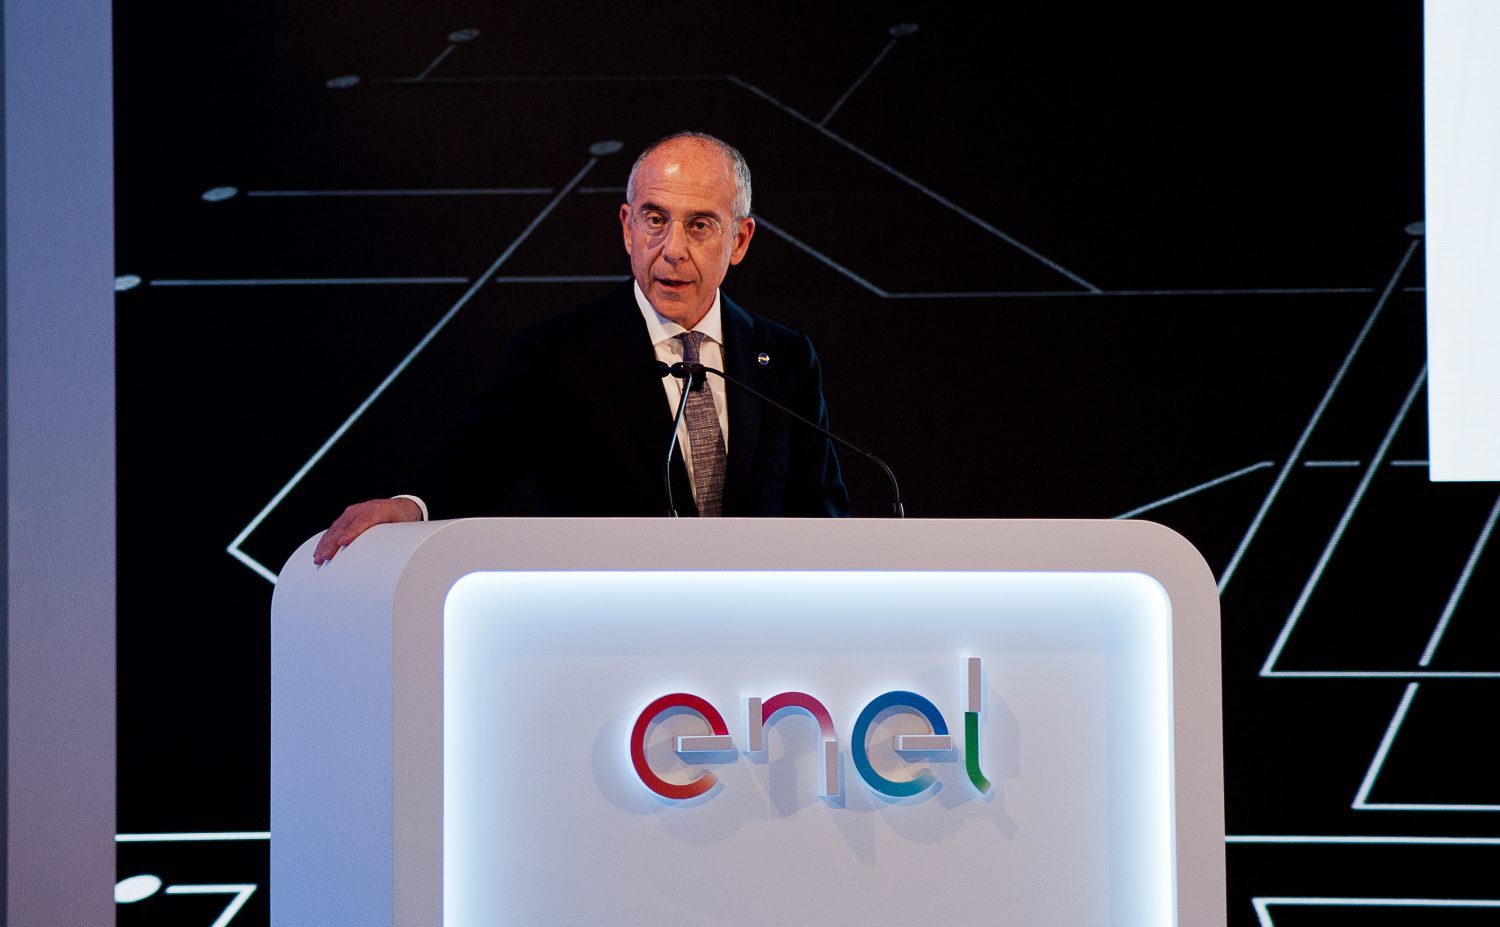 Francesco Starace, CEO and General Manager, Enel